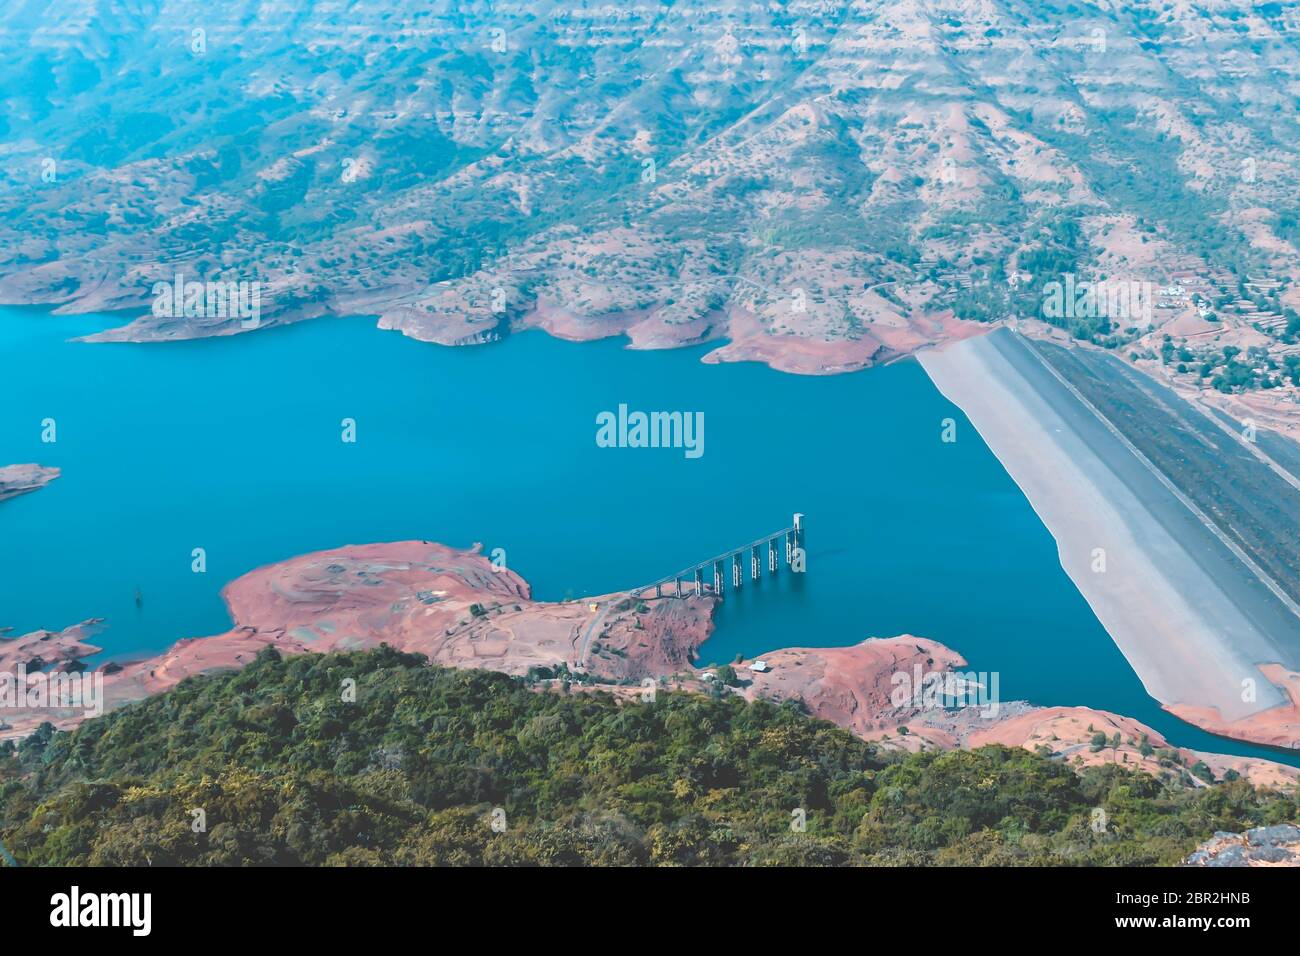 Sky view of Lavasa lake landscape. This is a beautiful place to spend your holidays and relaxation. ( LAVASA Lake - Pune, Maharashtra, India) Stock Photo